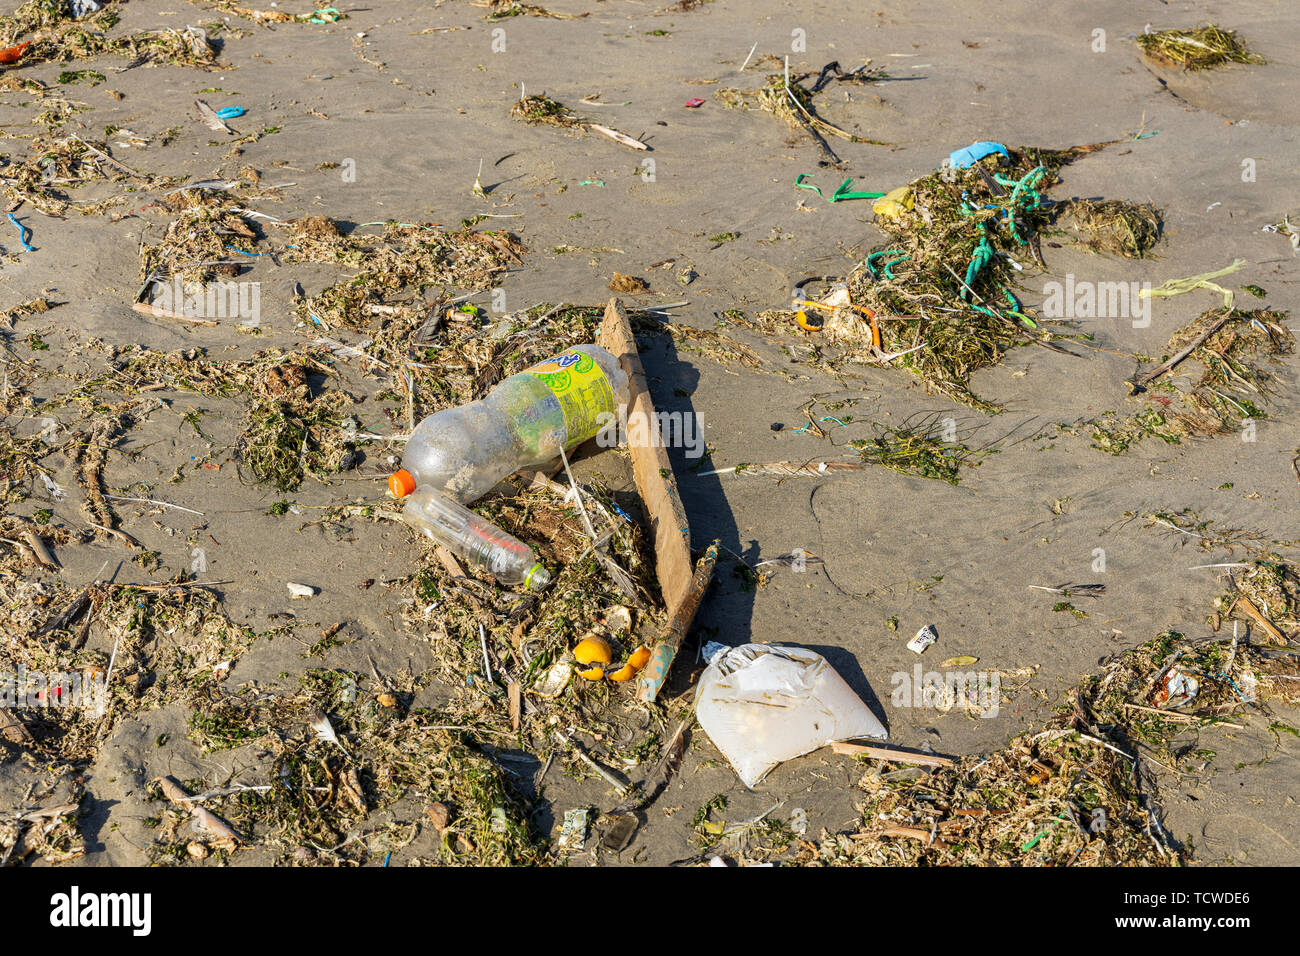 Discarded plastic bottles and other rubbish on the beach in Paracas, Peru, South America, Stock Photo